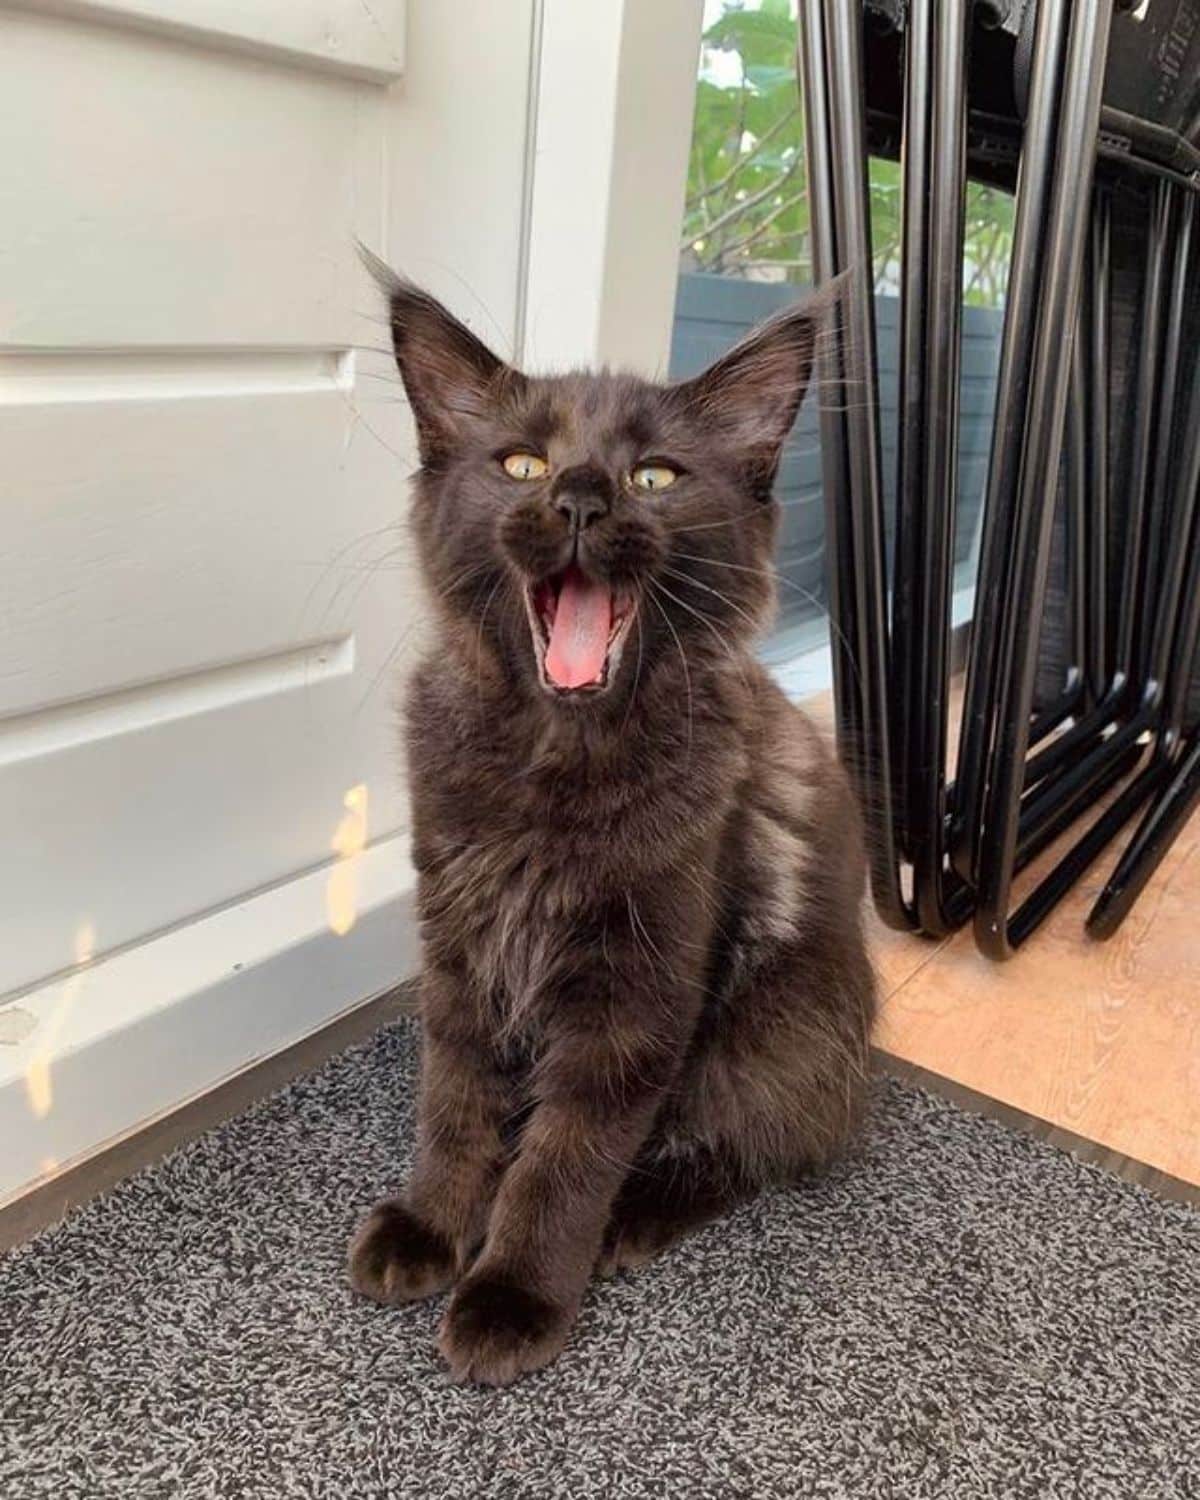 A yawning gray maine coon kitten sitting on a carpet.